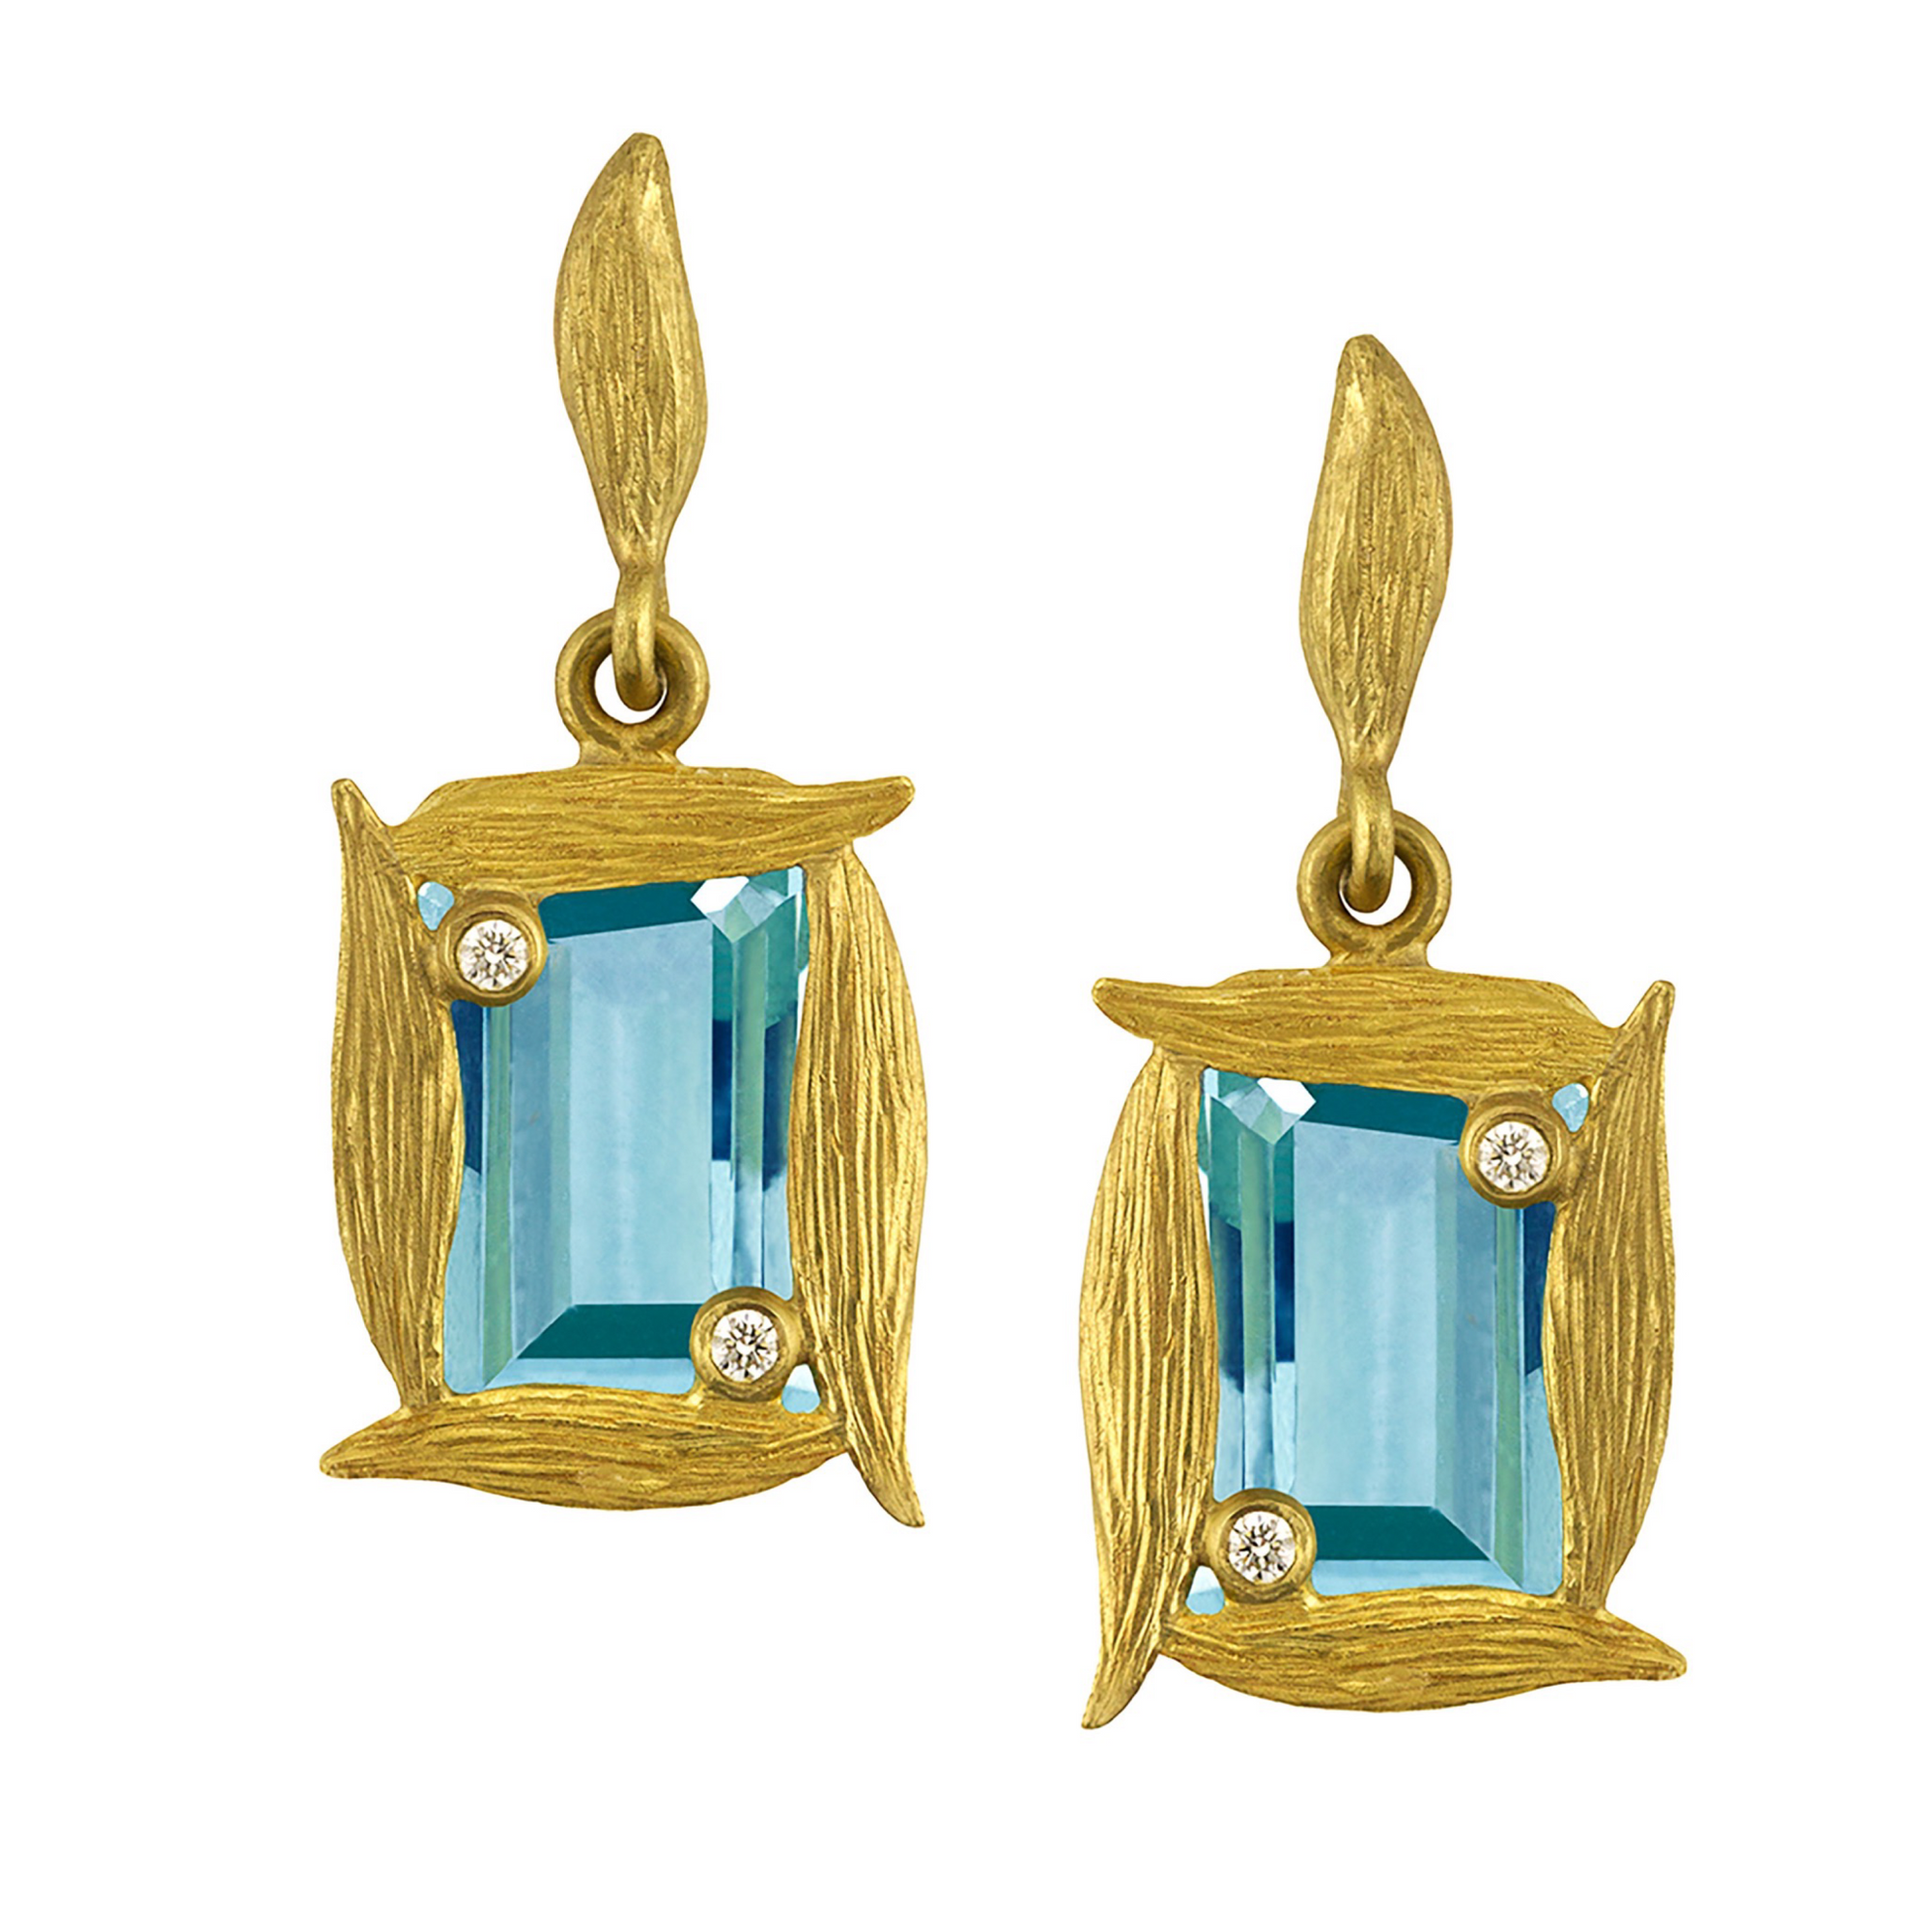 Sky Blue Topaz Vine Framed Earrings by Laurie Kaiser available at Talisman Collection Fine Jewelers in El Dorado Hills, CA and online. Expertly crafted with 18k yellow gold vines, these earrings feature stunning sky blue topaz gems that are perfectly accented by white brilliant diamonds totaling 0.04 cts. The classic post backs provide a secure and comfortable fit for all-day wear.